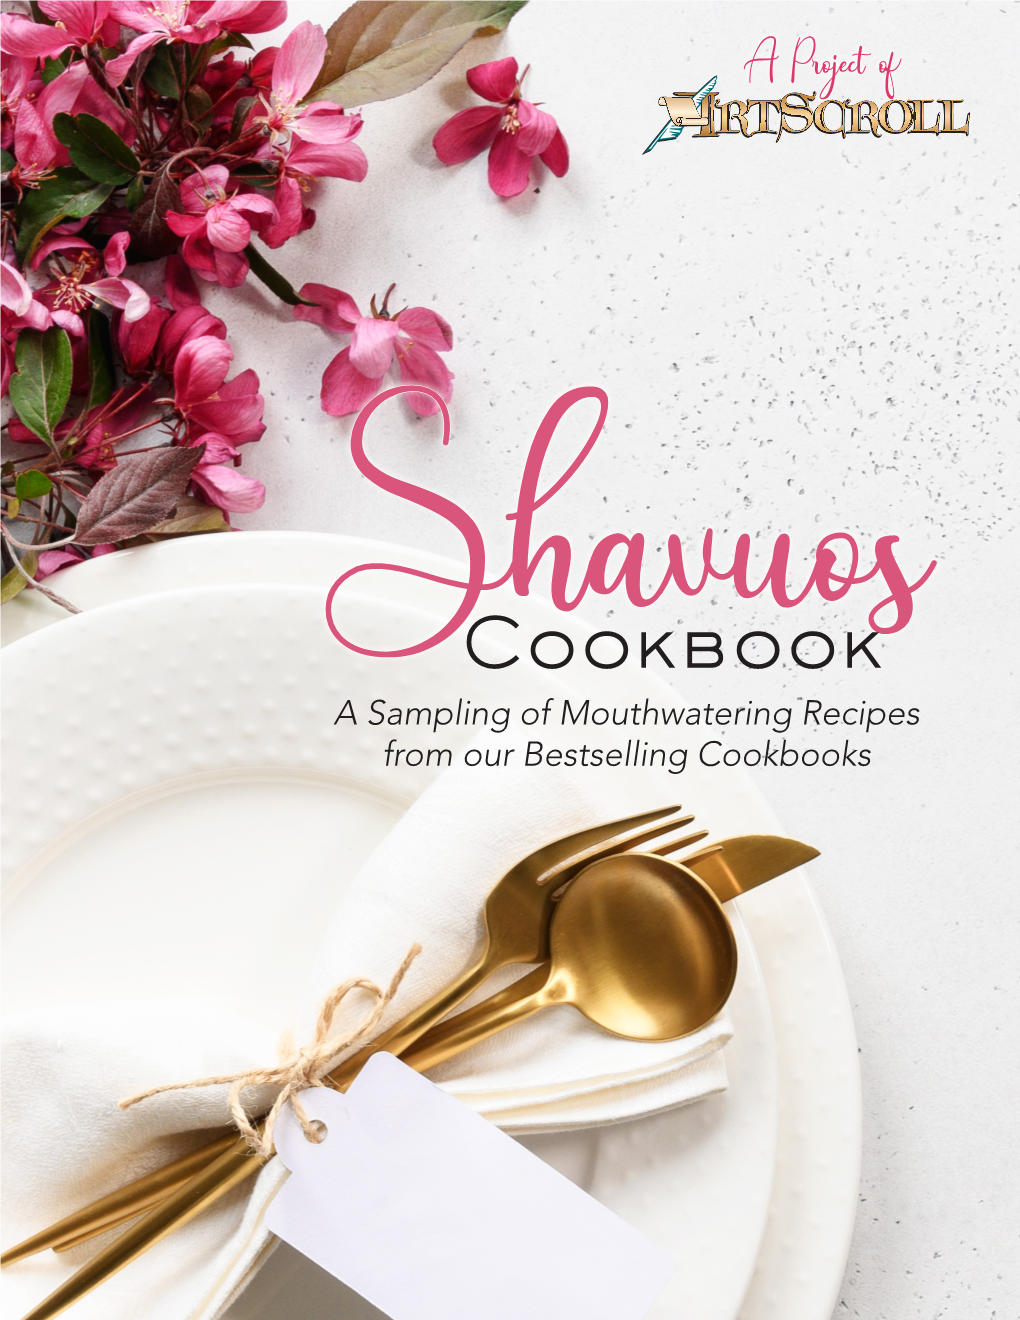 Cookbook Shavuosa Sampling of Mouthwatering Recipes from Our Bestselling Cookbooks NEW Upcoming Release from Sina Mizrahi